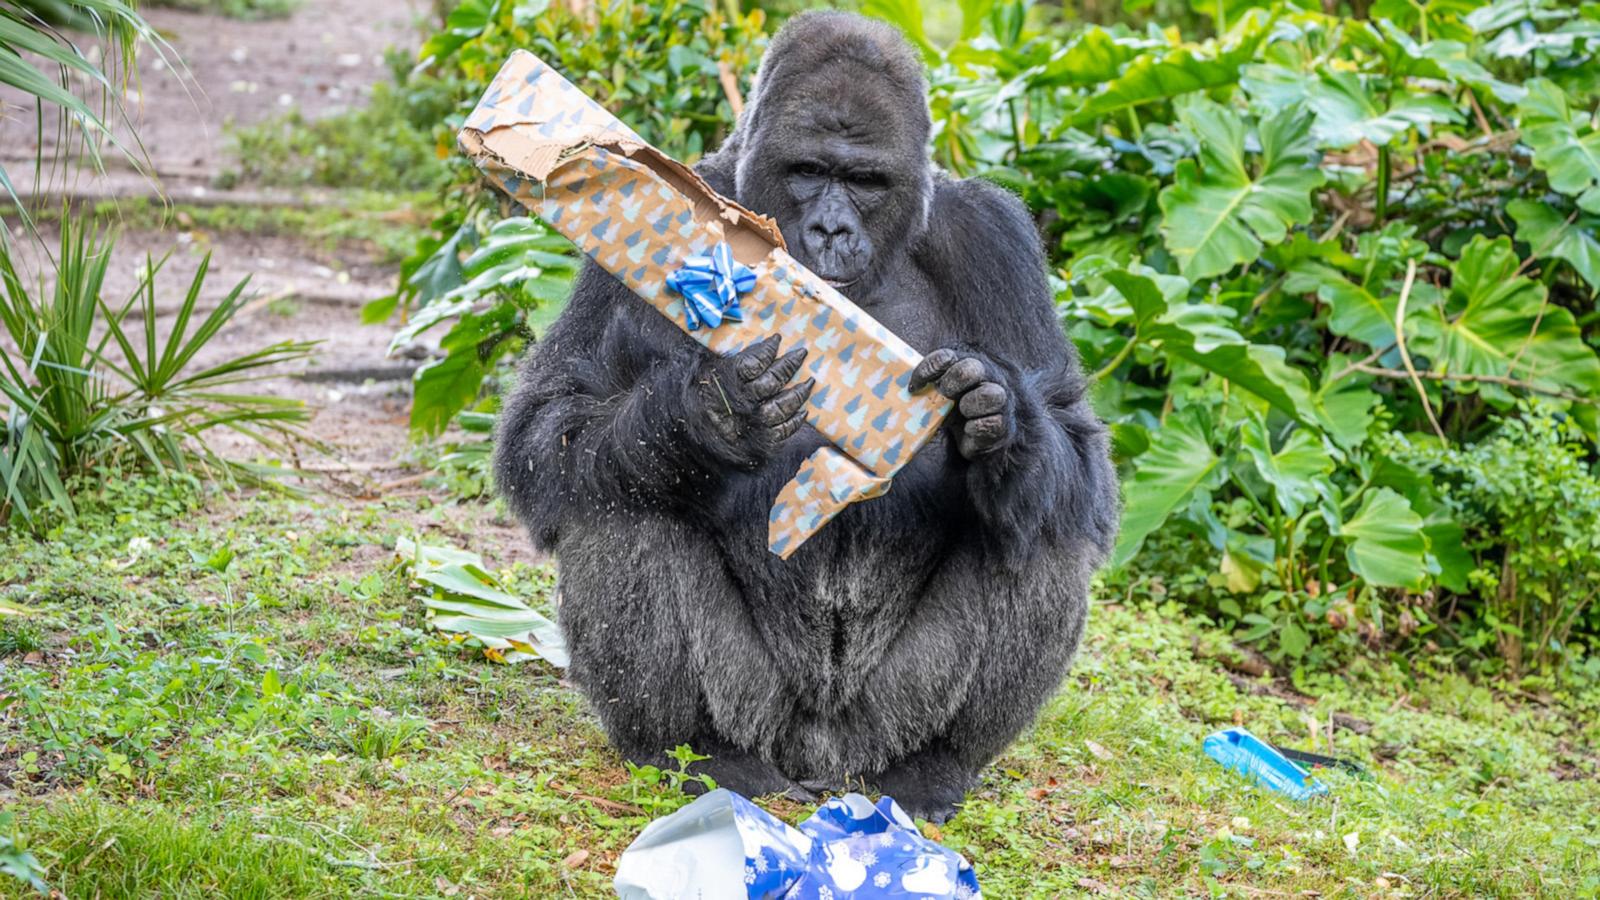 VIDEO: Gorillas at Disney’s Animal Kingdom open special gifts for the holidays